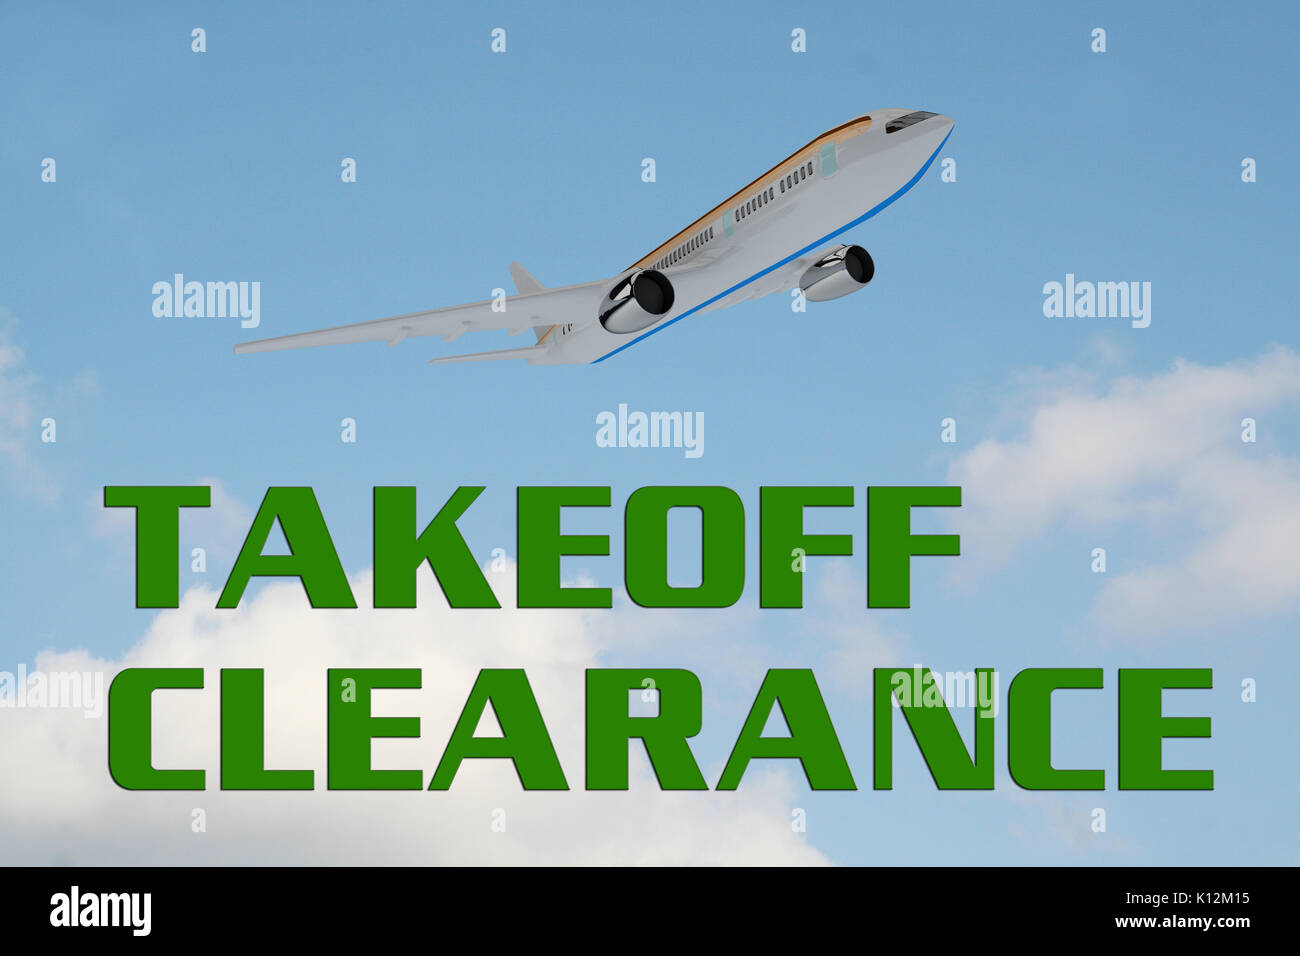 3D illustration of 'TAKEOFF CLEARANCE' title on cloudy sky as a background, under an airplane which is taking off. Stock Photo